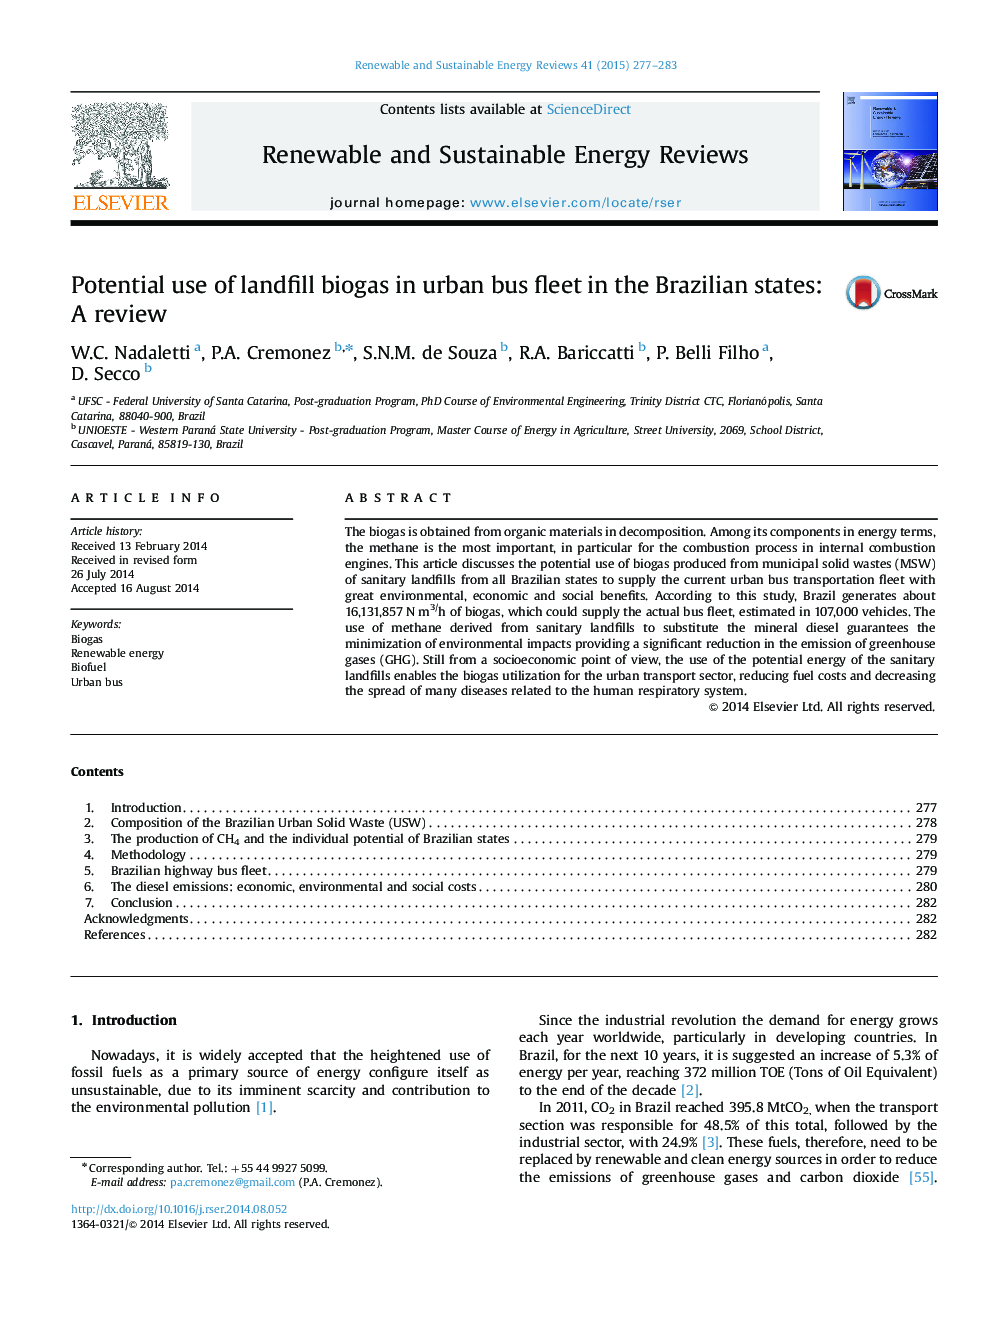 Potential use of landfill biogas in urban bus fleet in the Brazilian states: A review